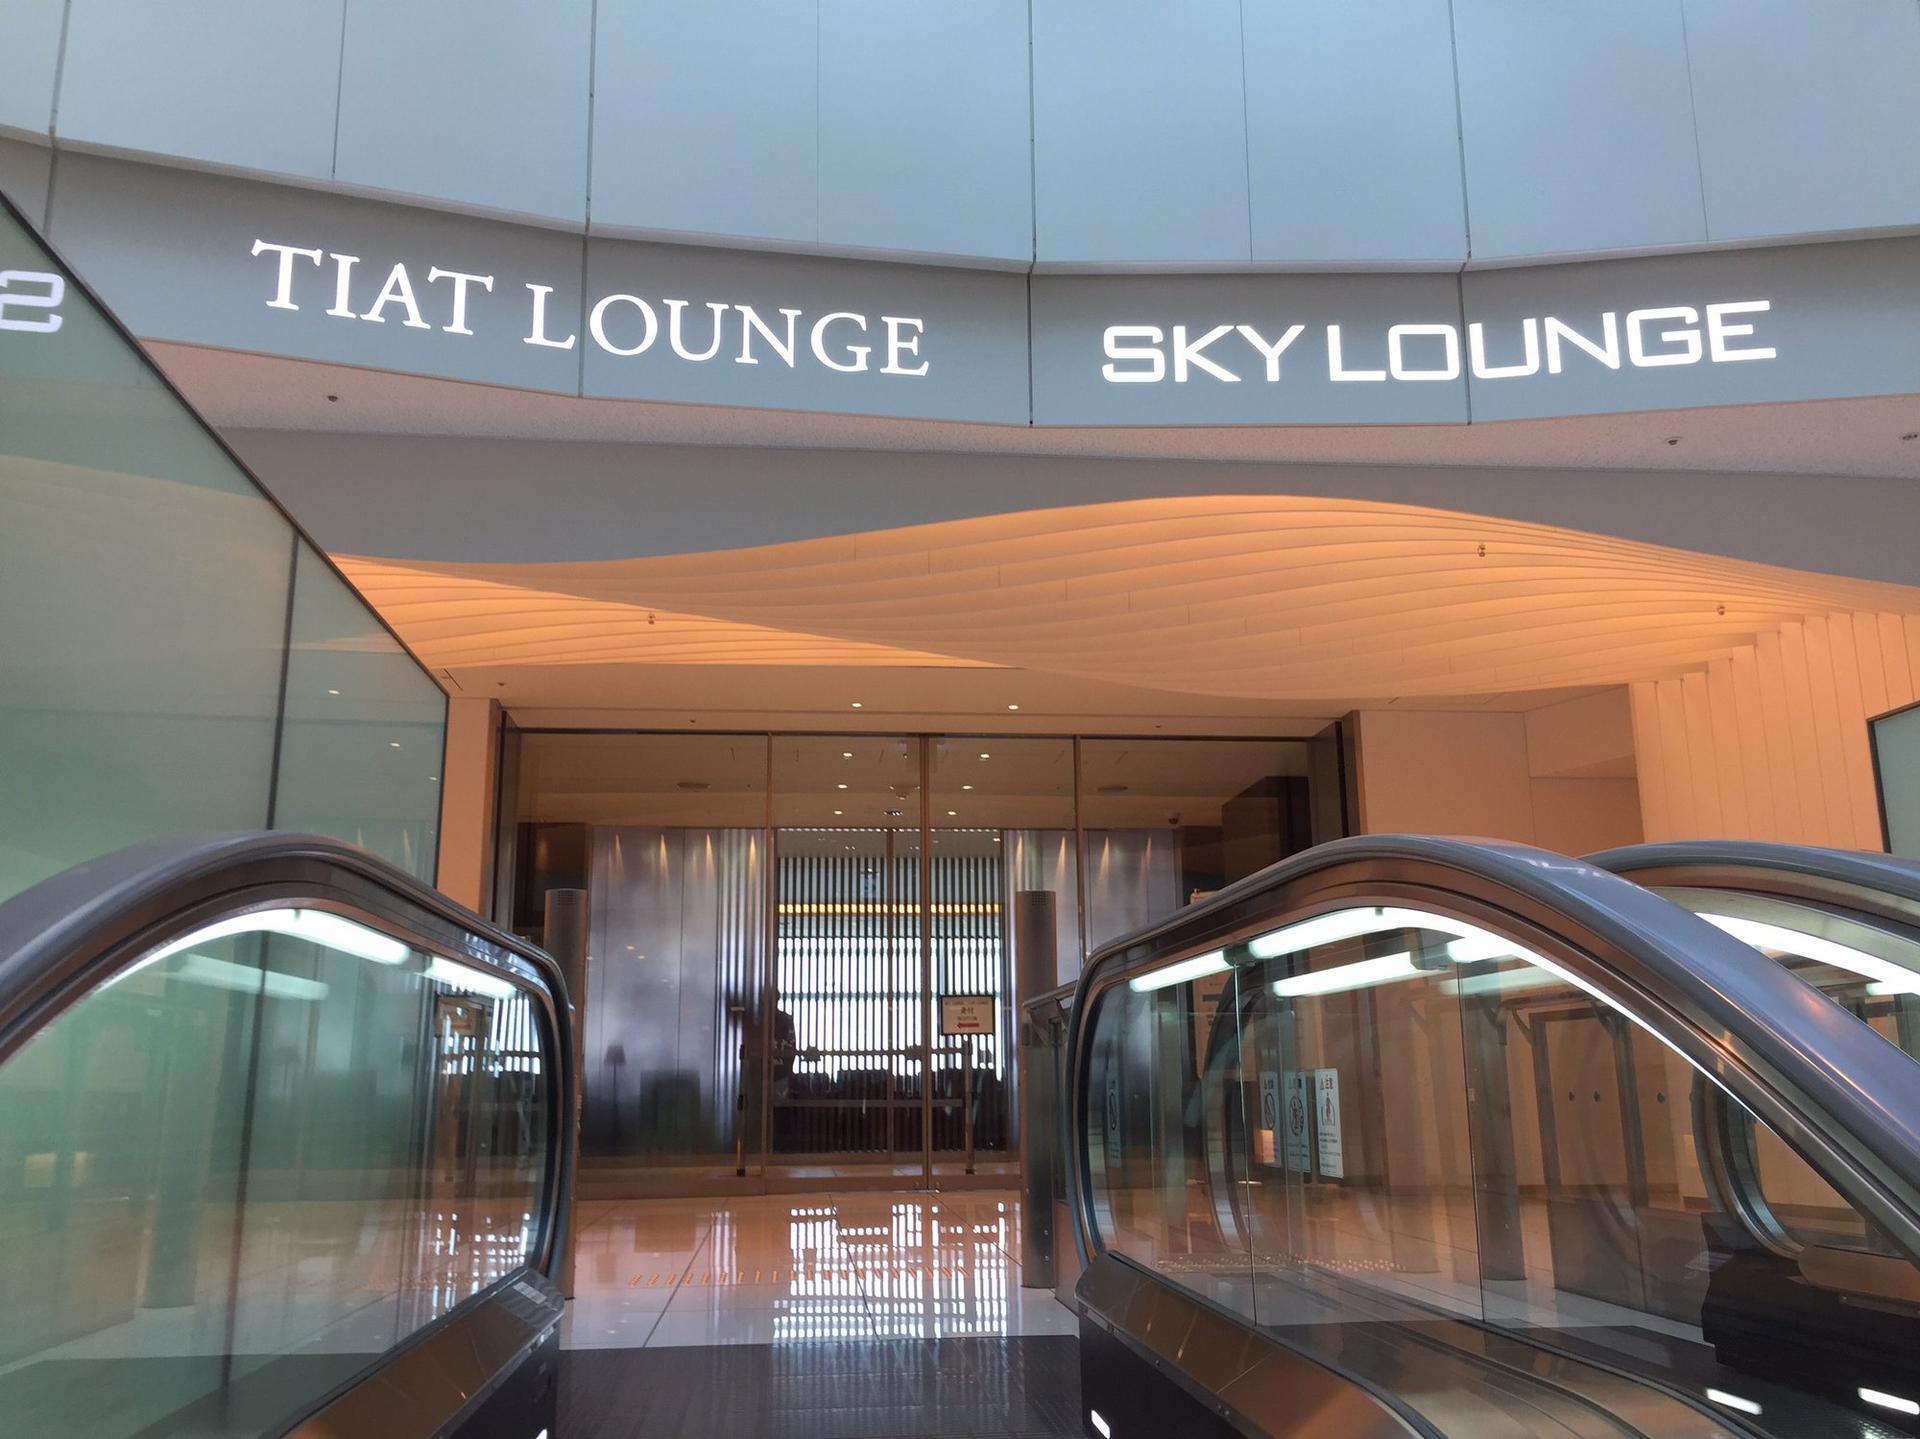 TIAT Lounge (Closed, Temp Location Available) image 1 of 1